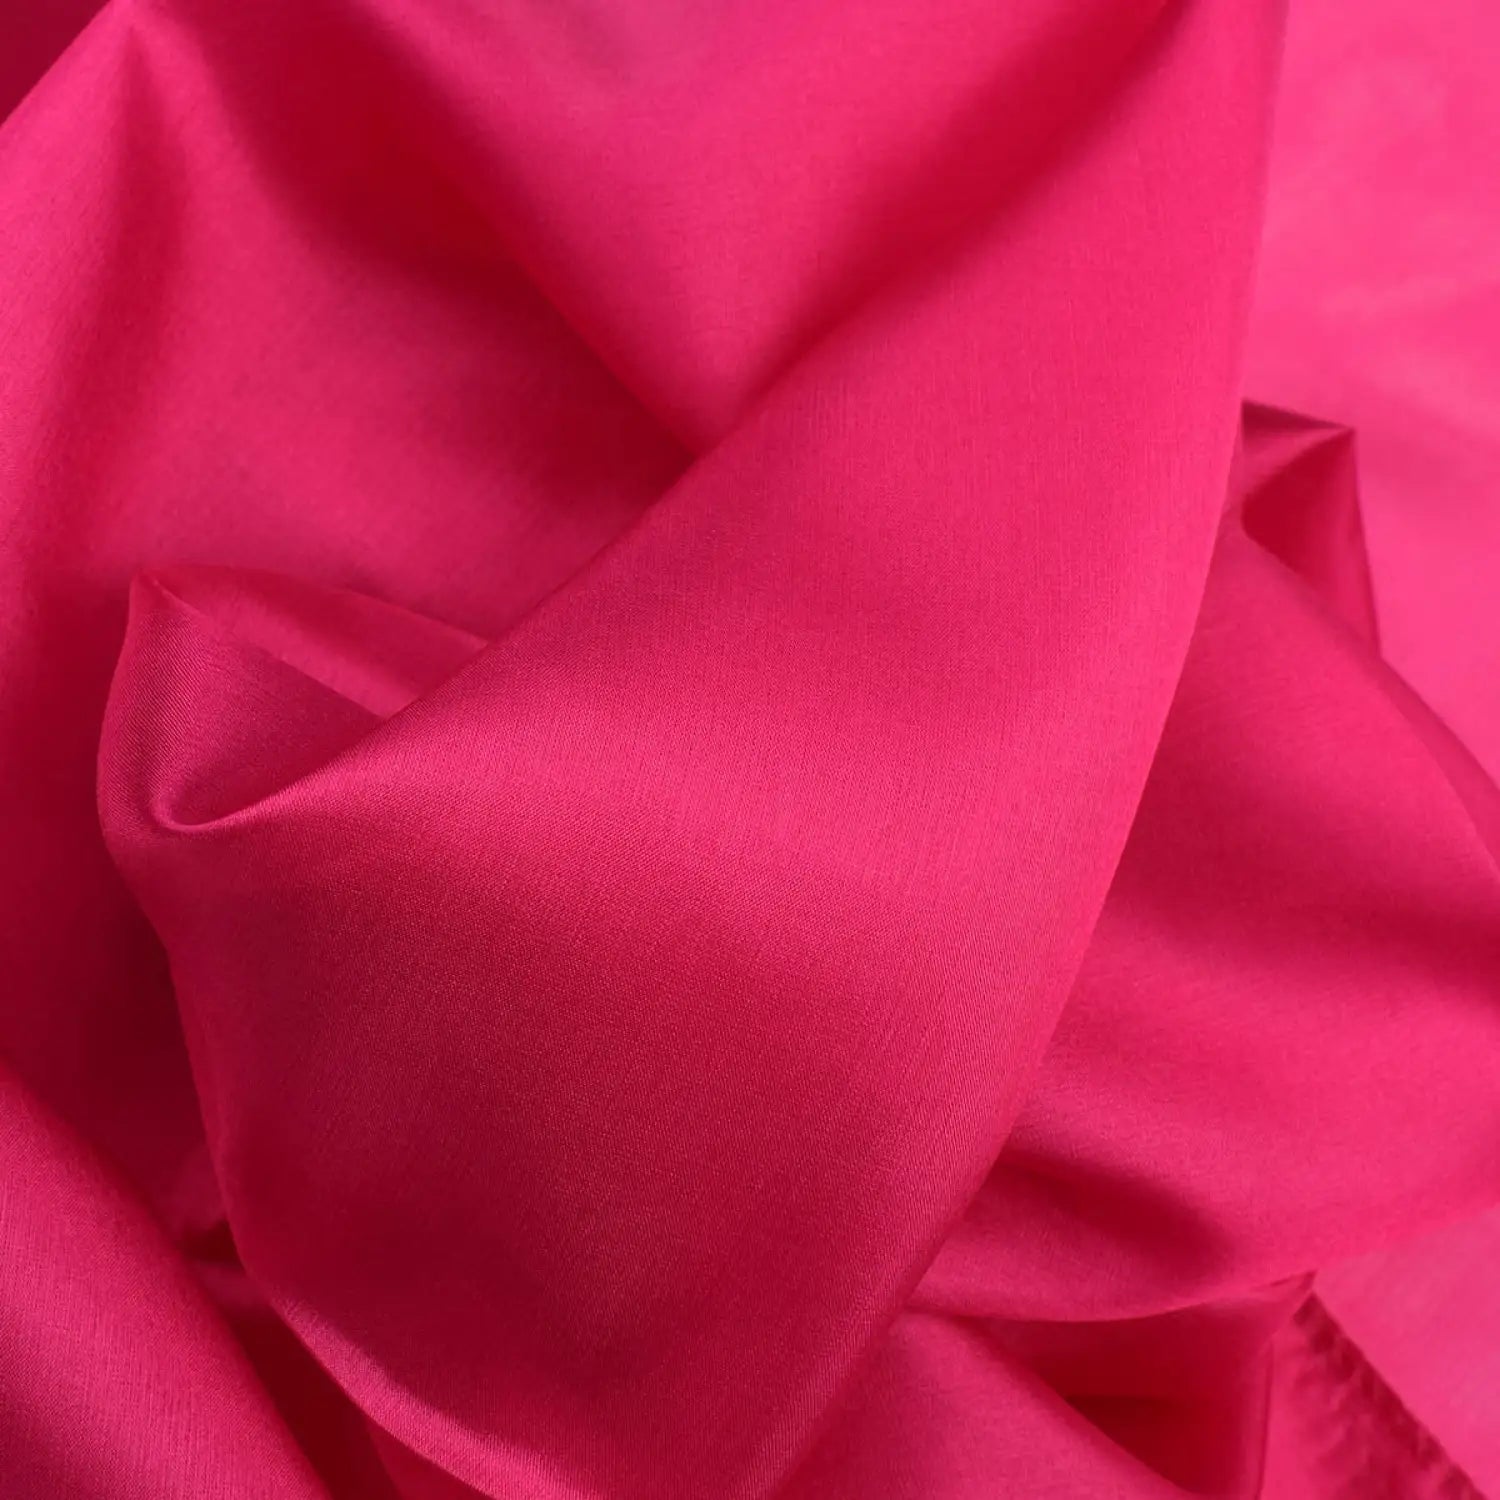 Mulberry silk luxurious multiuse scarf in pink fabric